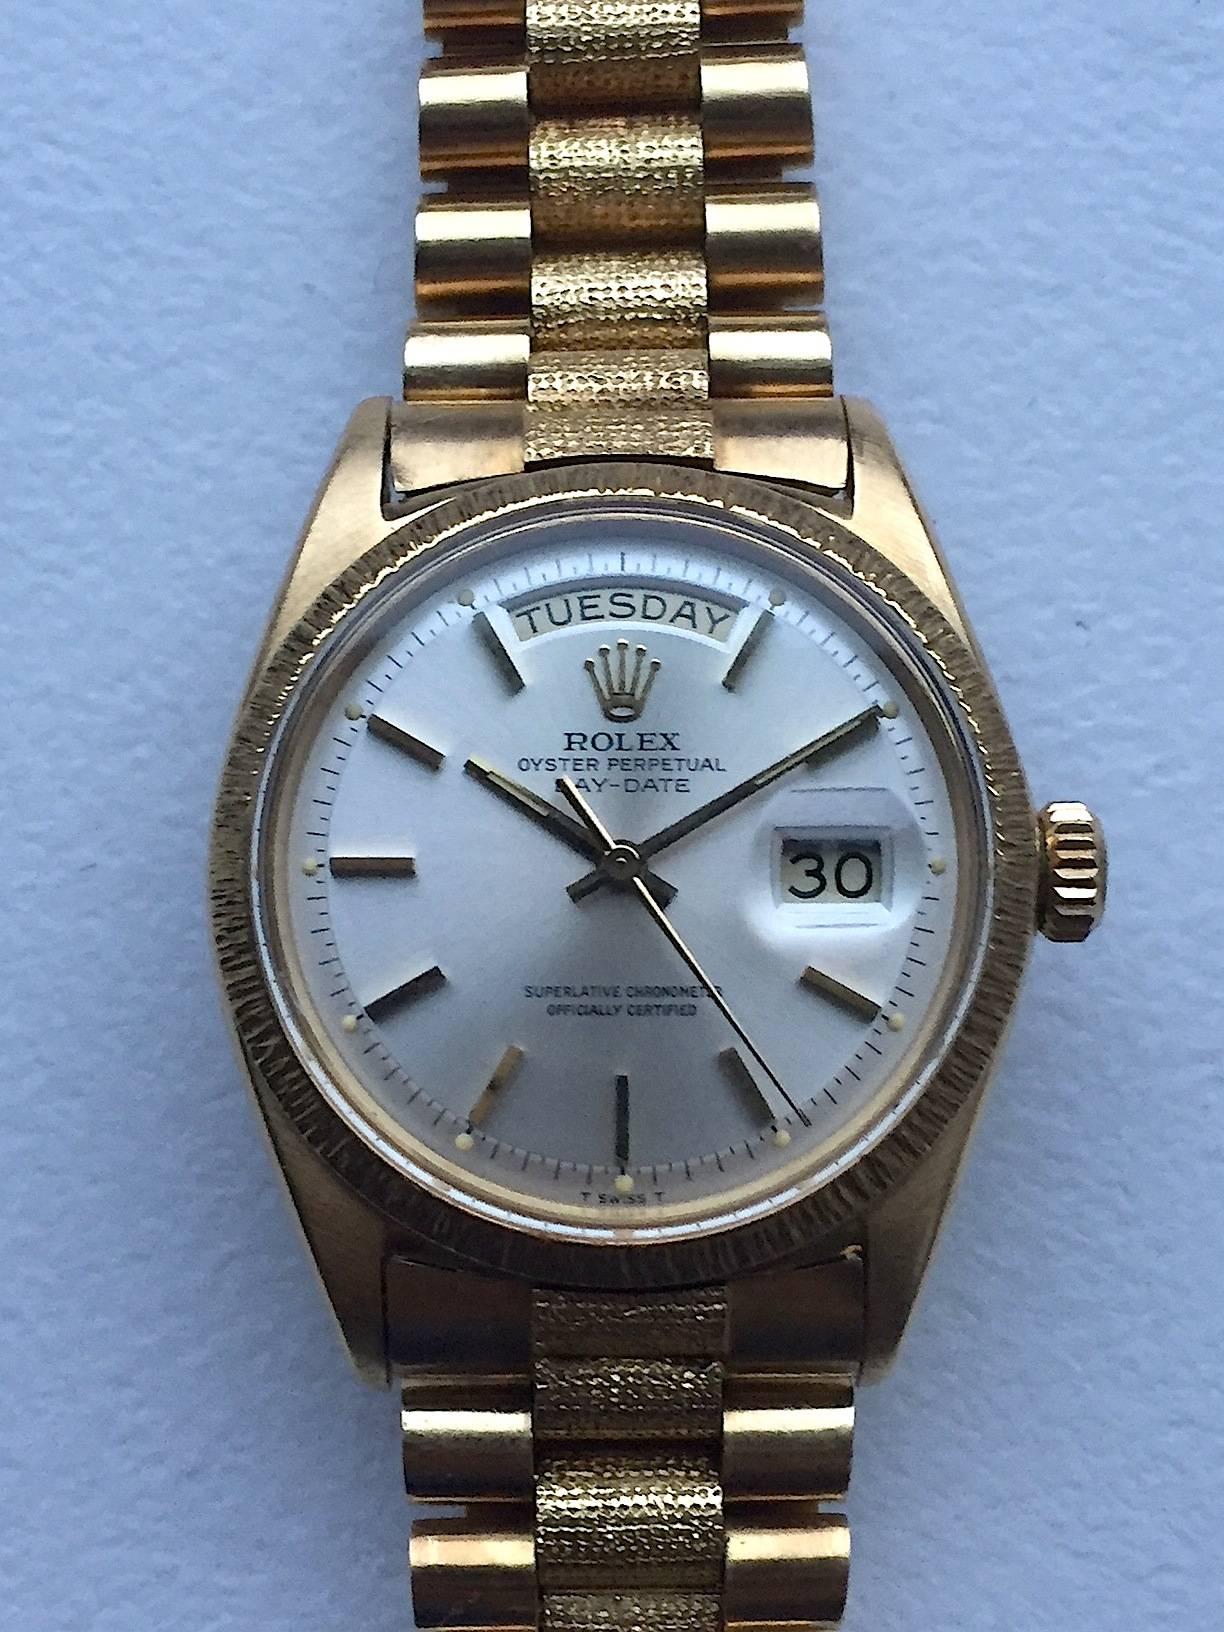 Rolex 18K Yellow Gold Oyster Perpetual Day-Date Presidential Wristwatch
Factory Rolex Oyster T swiss T Dial with Applied Stick Hour Markers
Rare Reference 1807 with Factory Finish
18K Yellow Gold Bezel with Bark Finish
36MM in Size 
Rolex Calibre